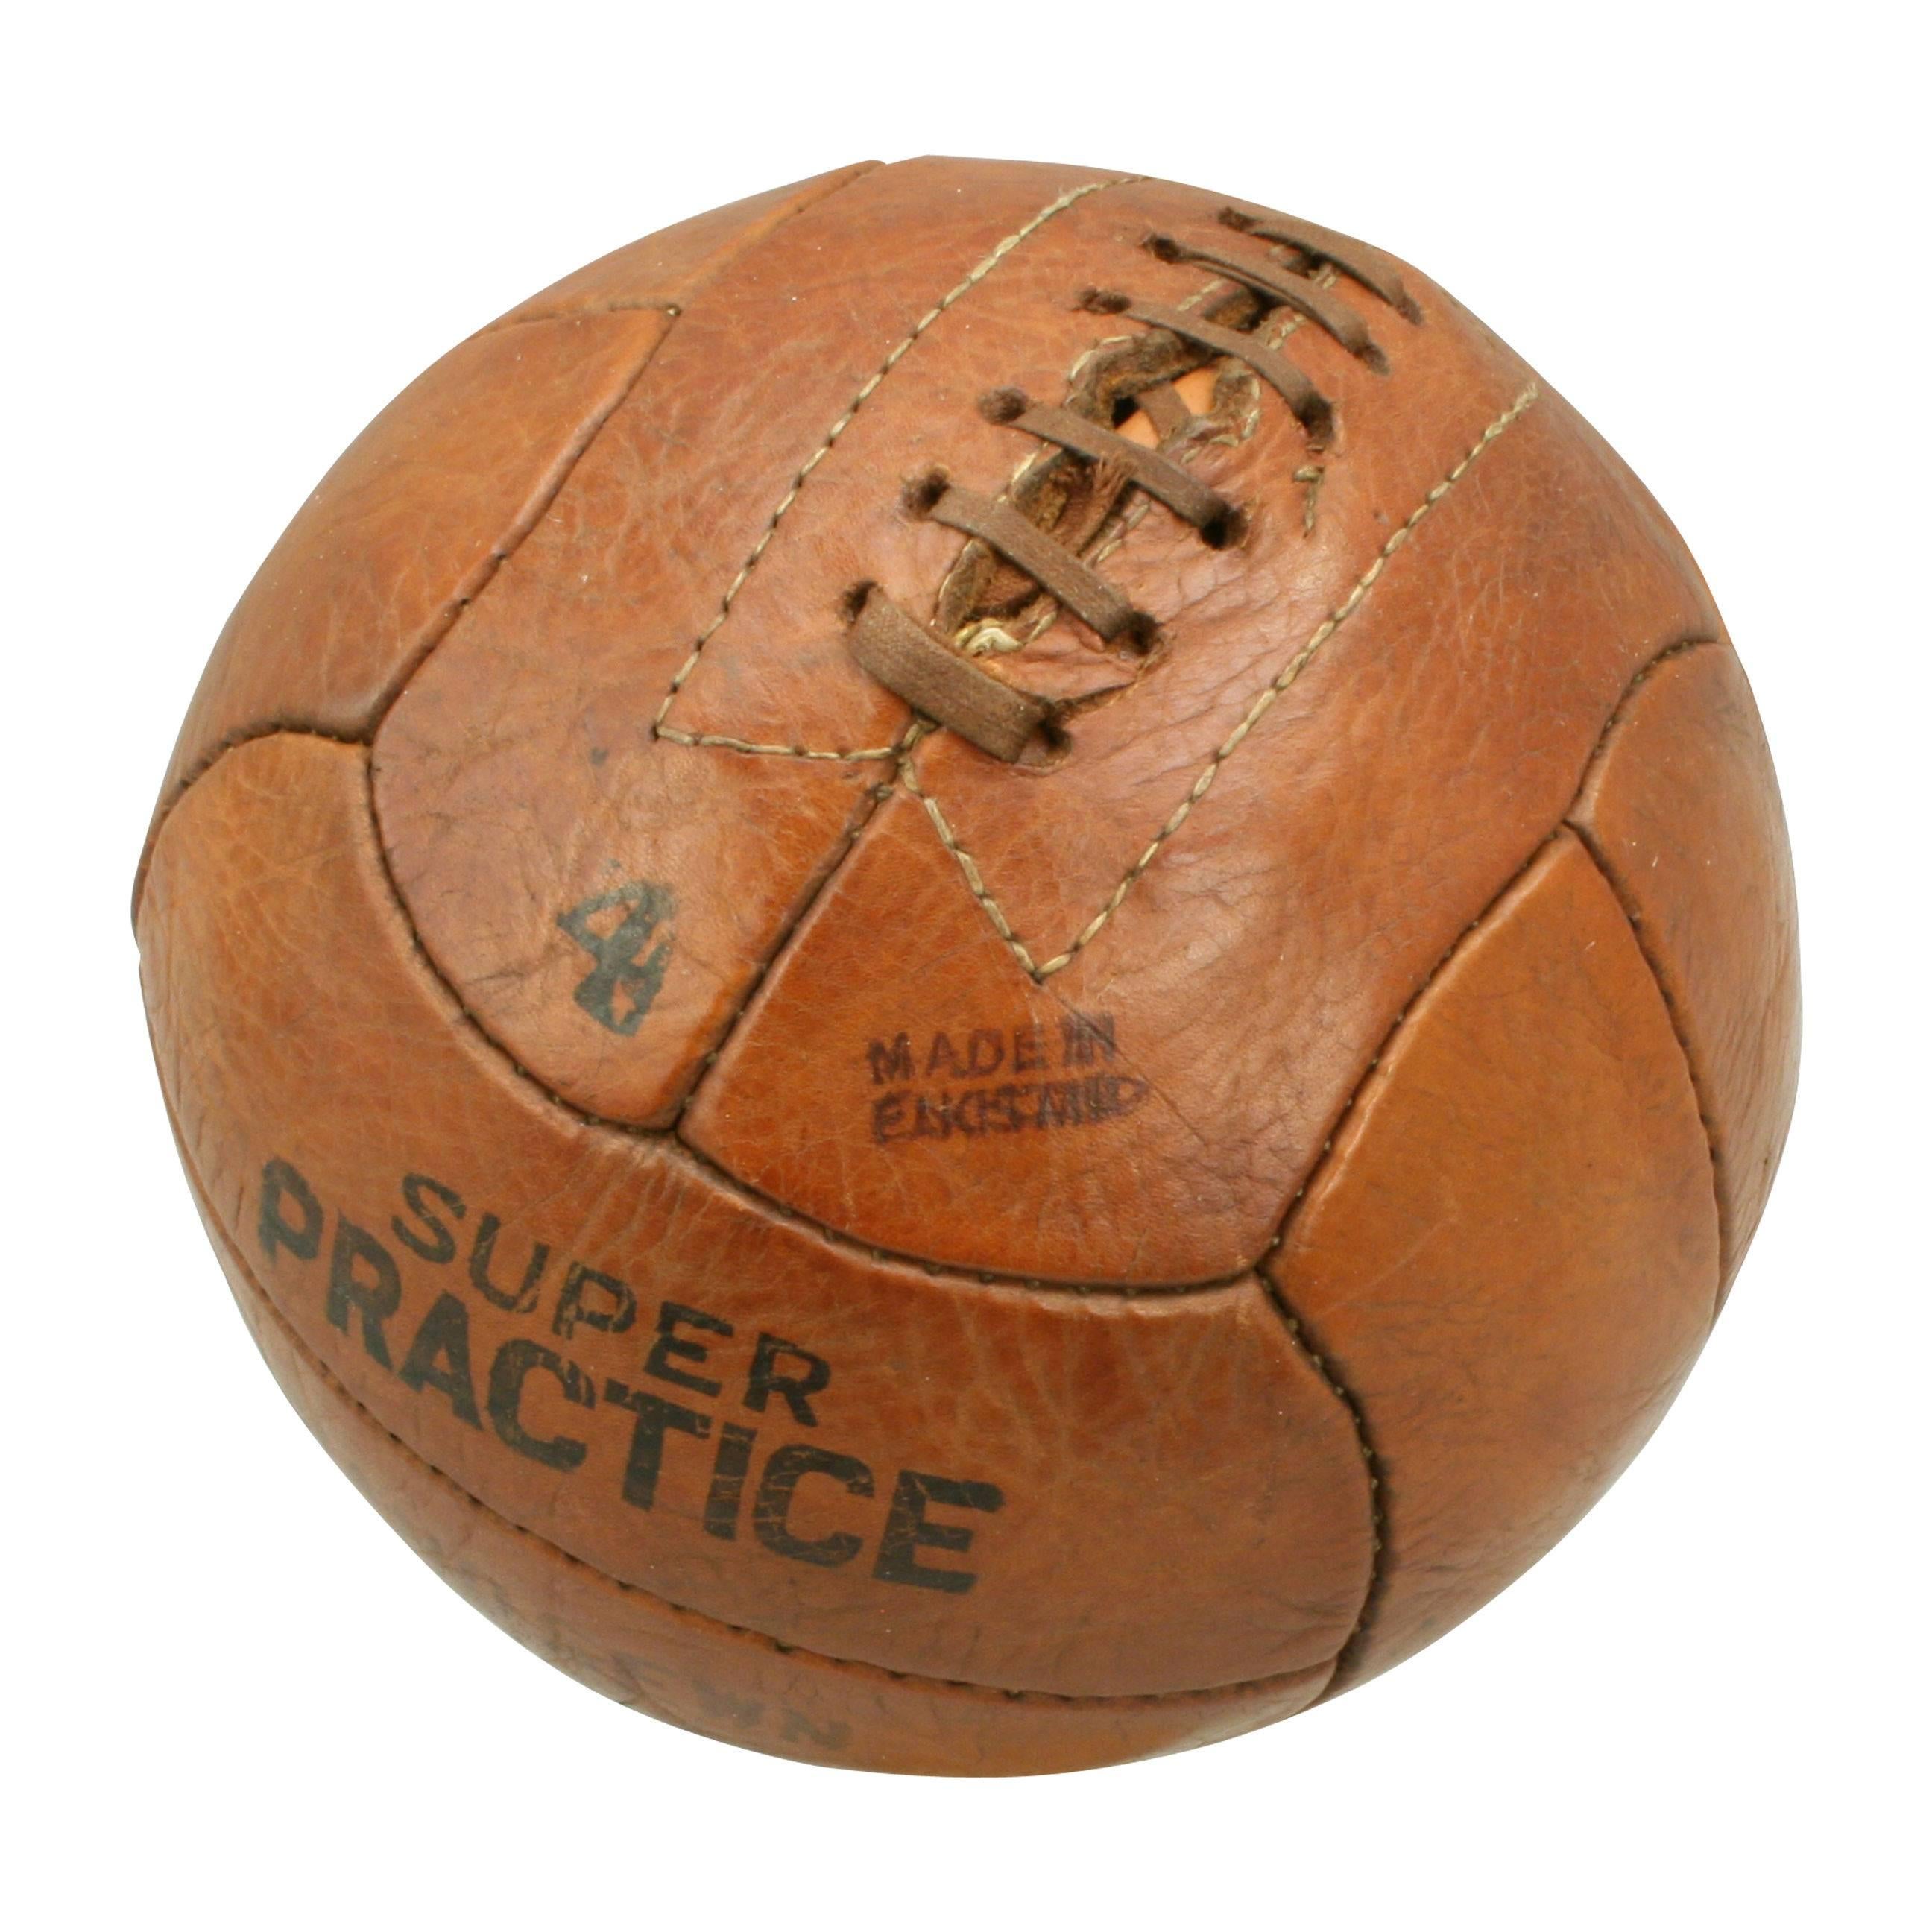 Vintage no.4 leather football.
A traditional hand-sewn 12-panel tan leather football in very good original condition. The ball has a lace-up slit to the top to enable bladder inflation. Ball is marked '4, super practice, hand-sewn, made in England,